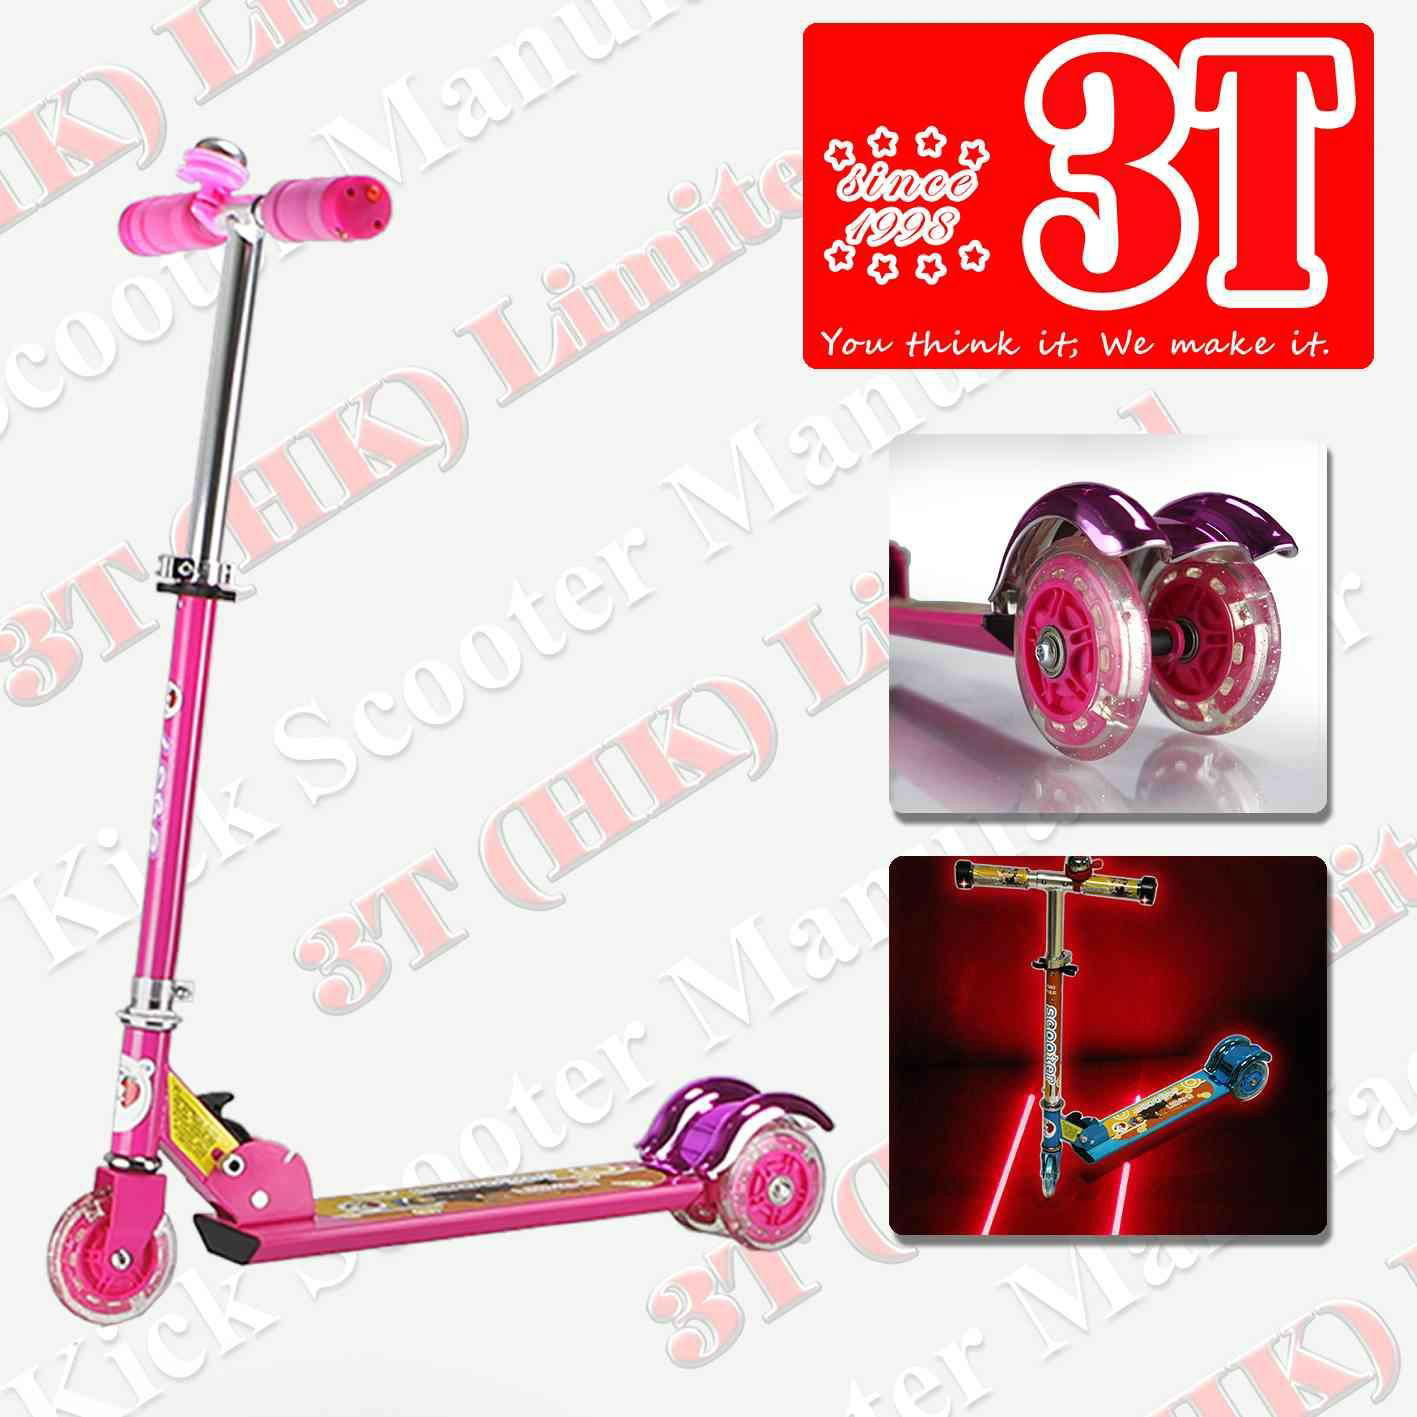 100mm PVC Wheel Promotional Kick Scooter with Laser Projectoer